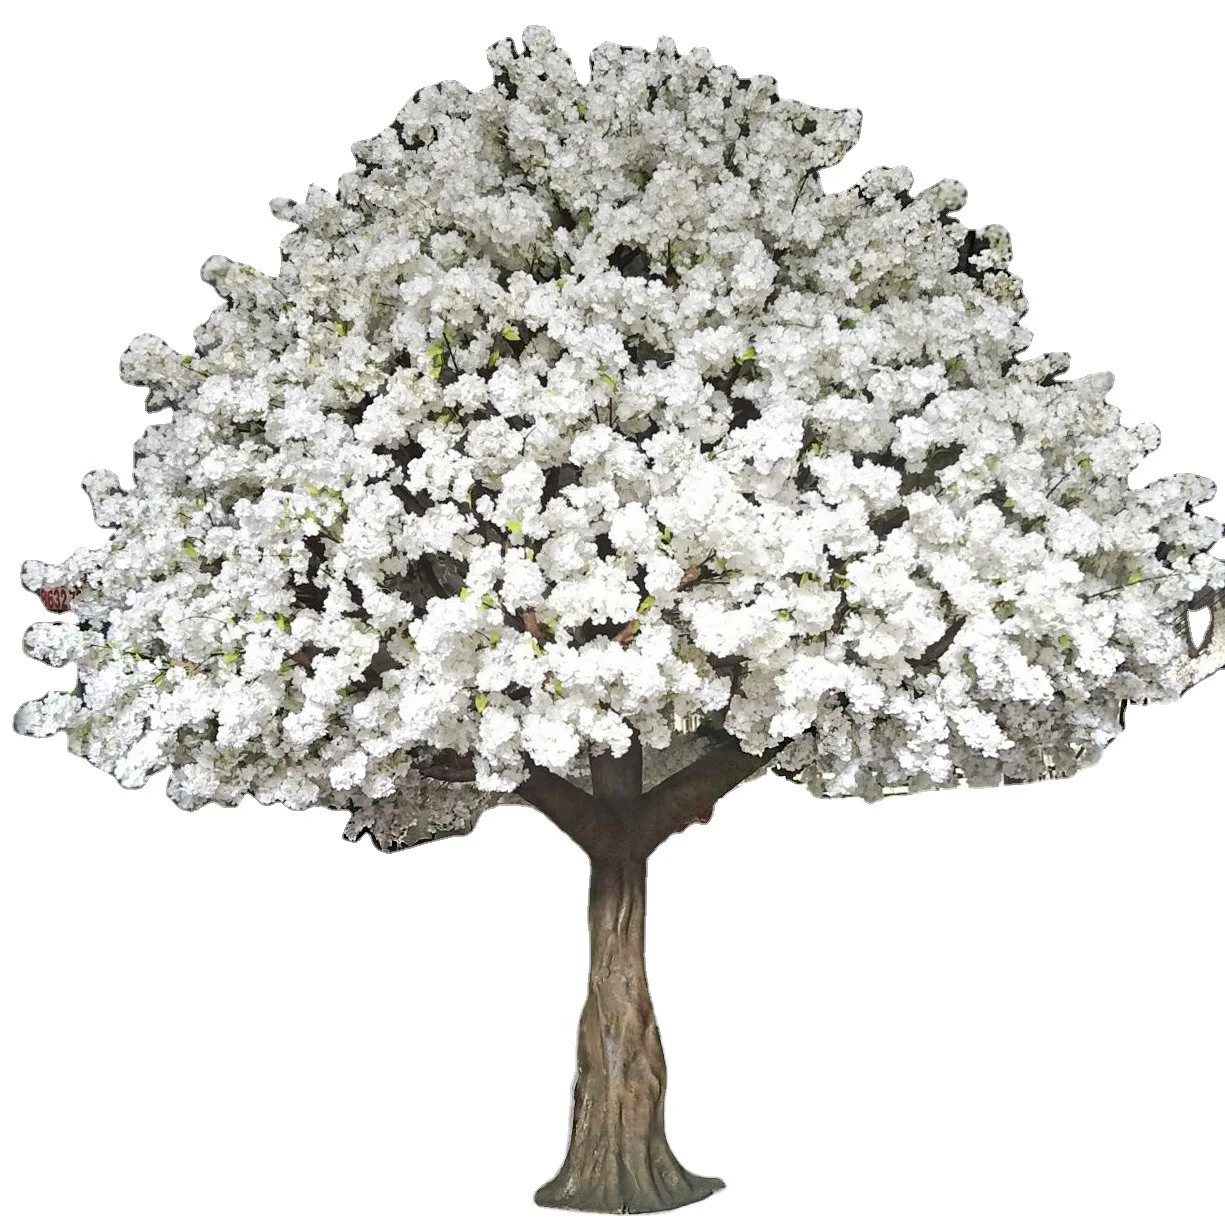 

Wholesale Large Fiberglass Trunk Wedding Table Centerpieces Palnt Trees White Artificial Cherry Blossom Tree